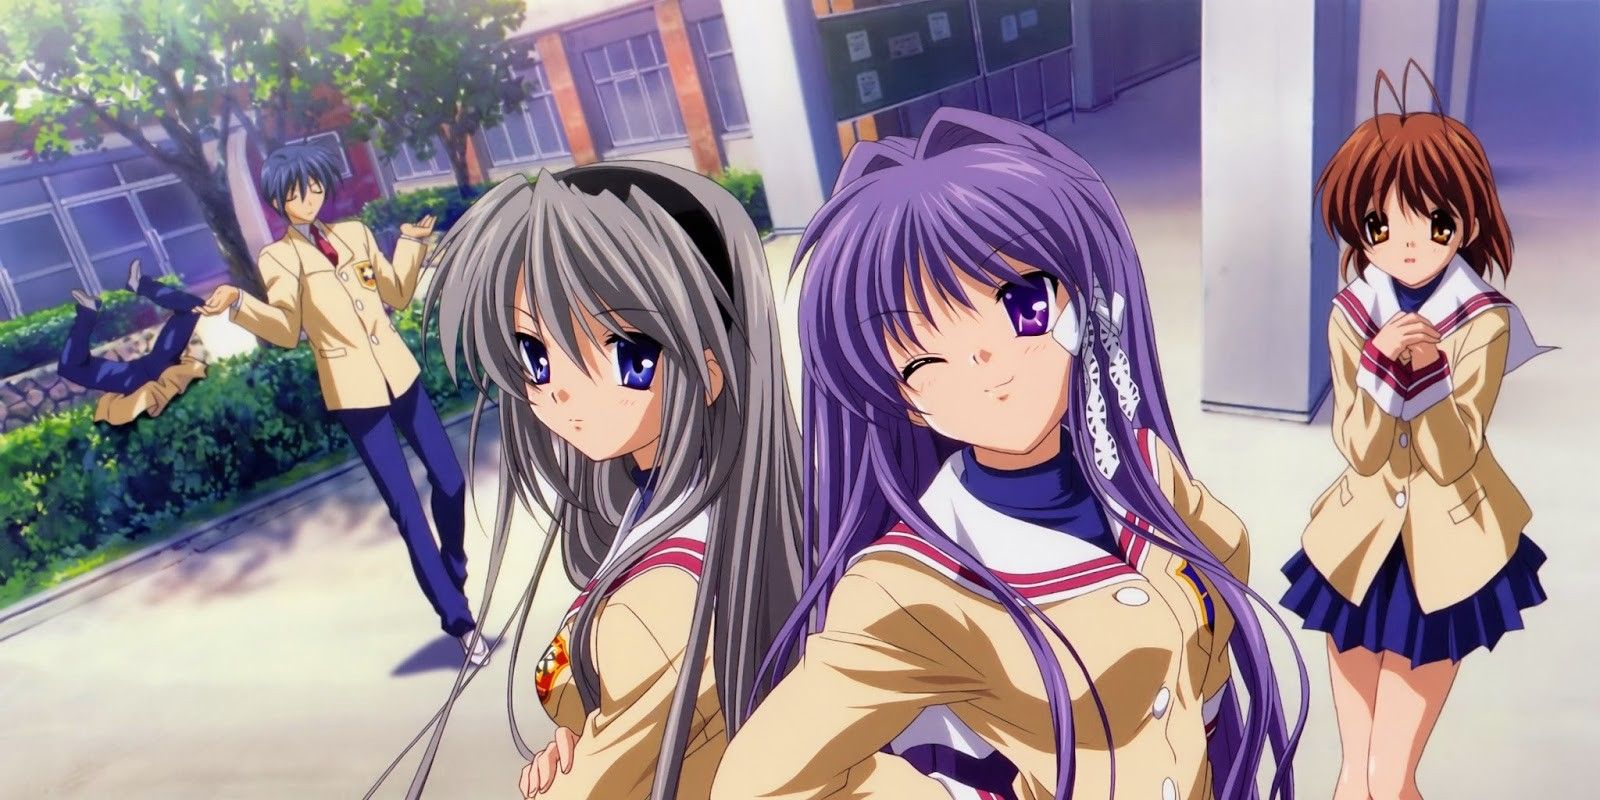 Characters from Clannad in a courtyard.